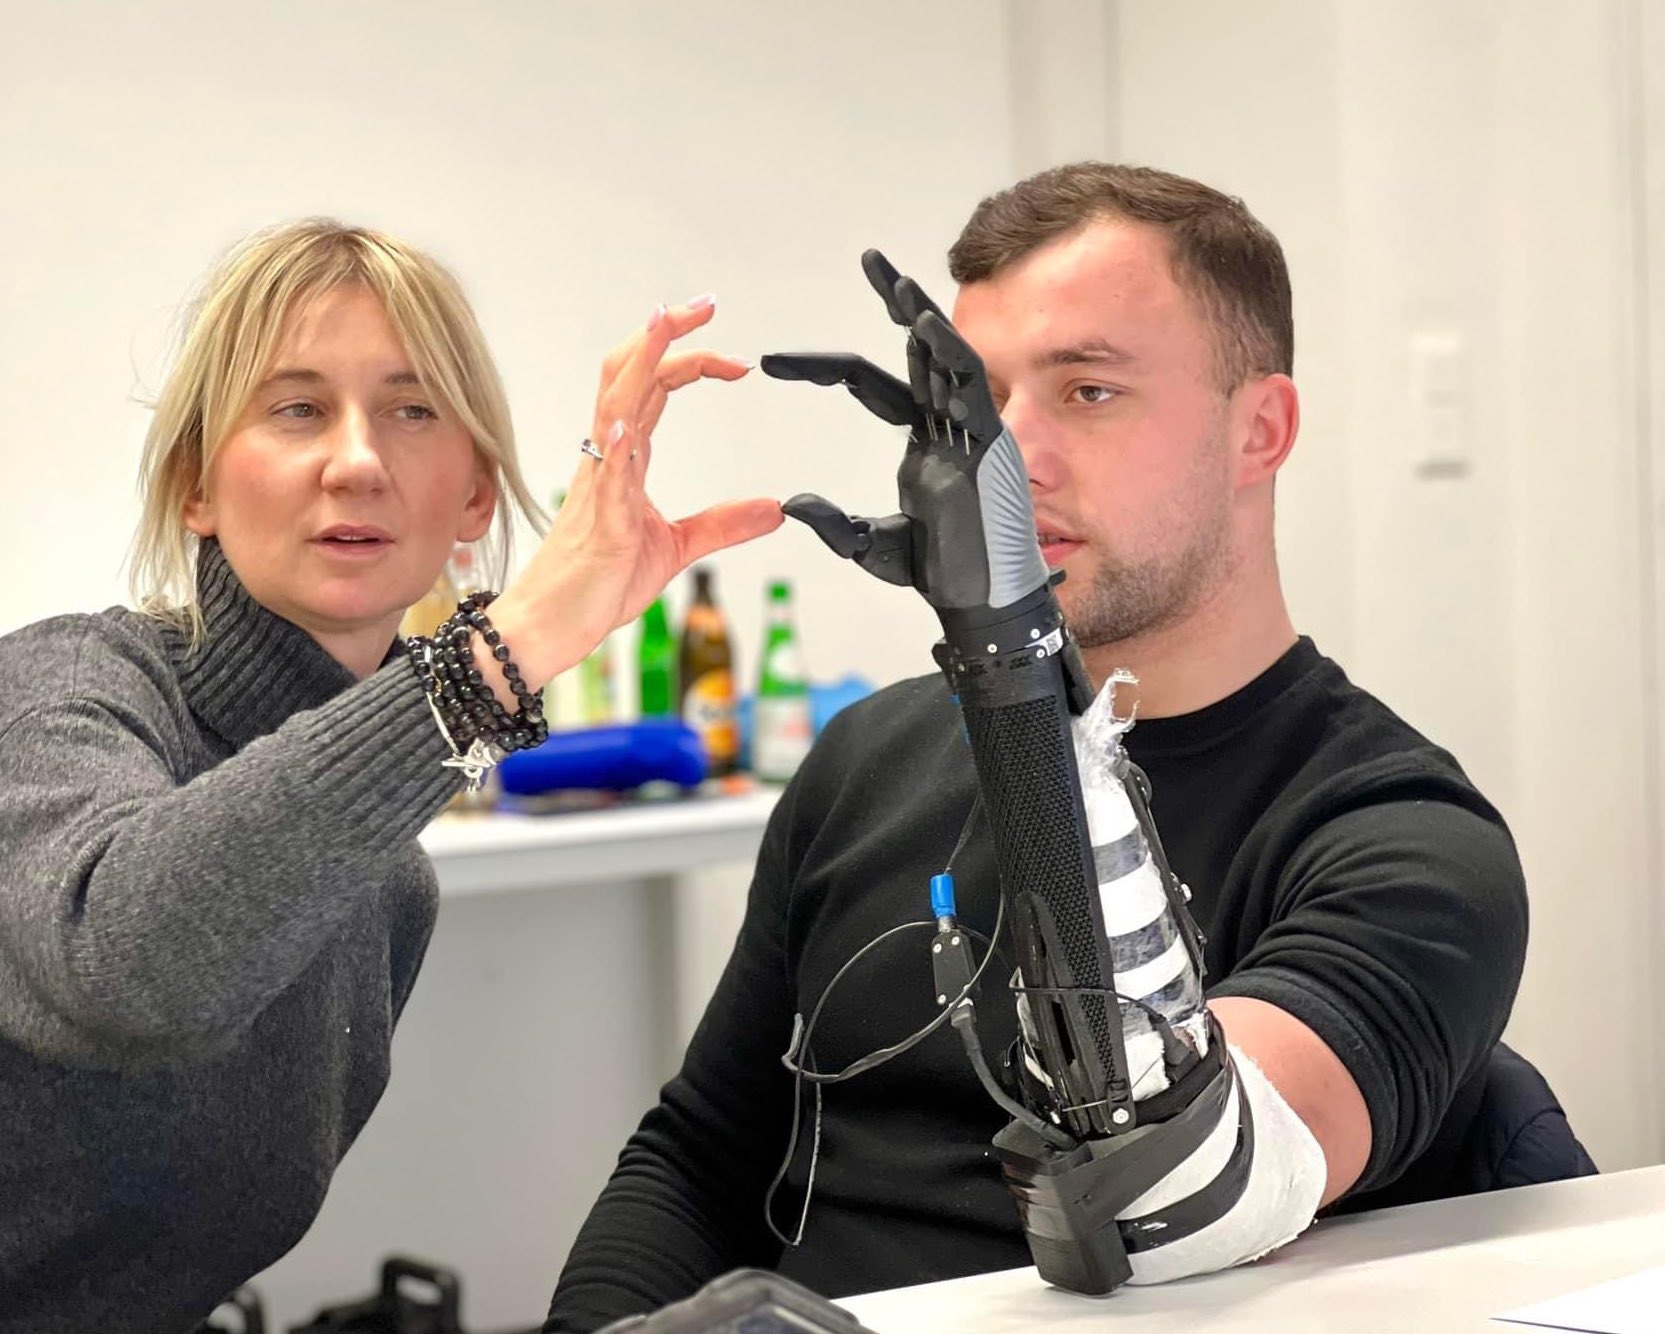 Injured Ukrainian soldiers treated with cutting-edge 3D printed bionic arms  - 3D Printing Industry